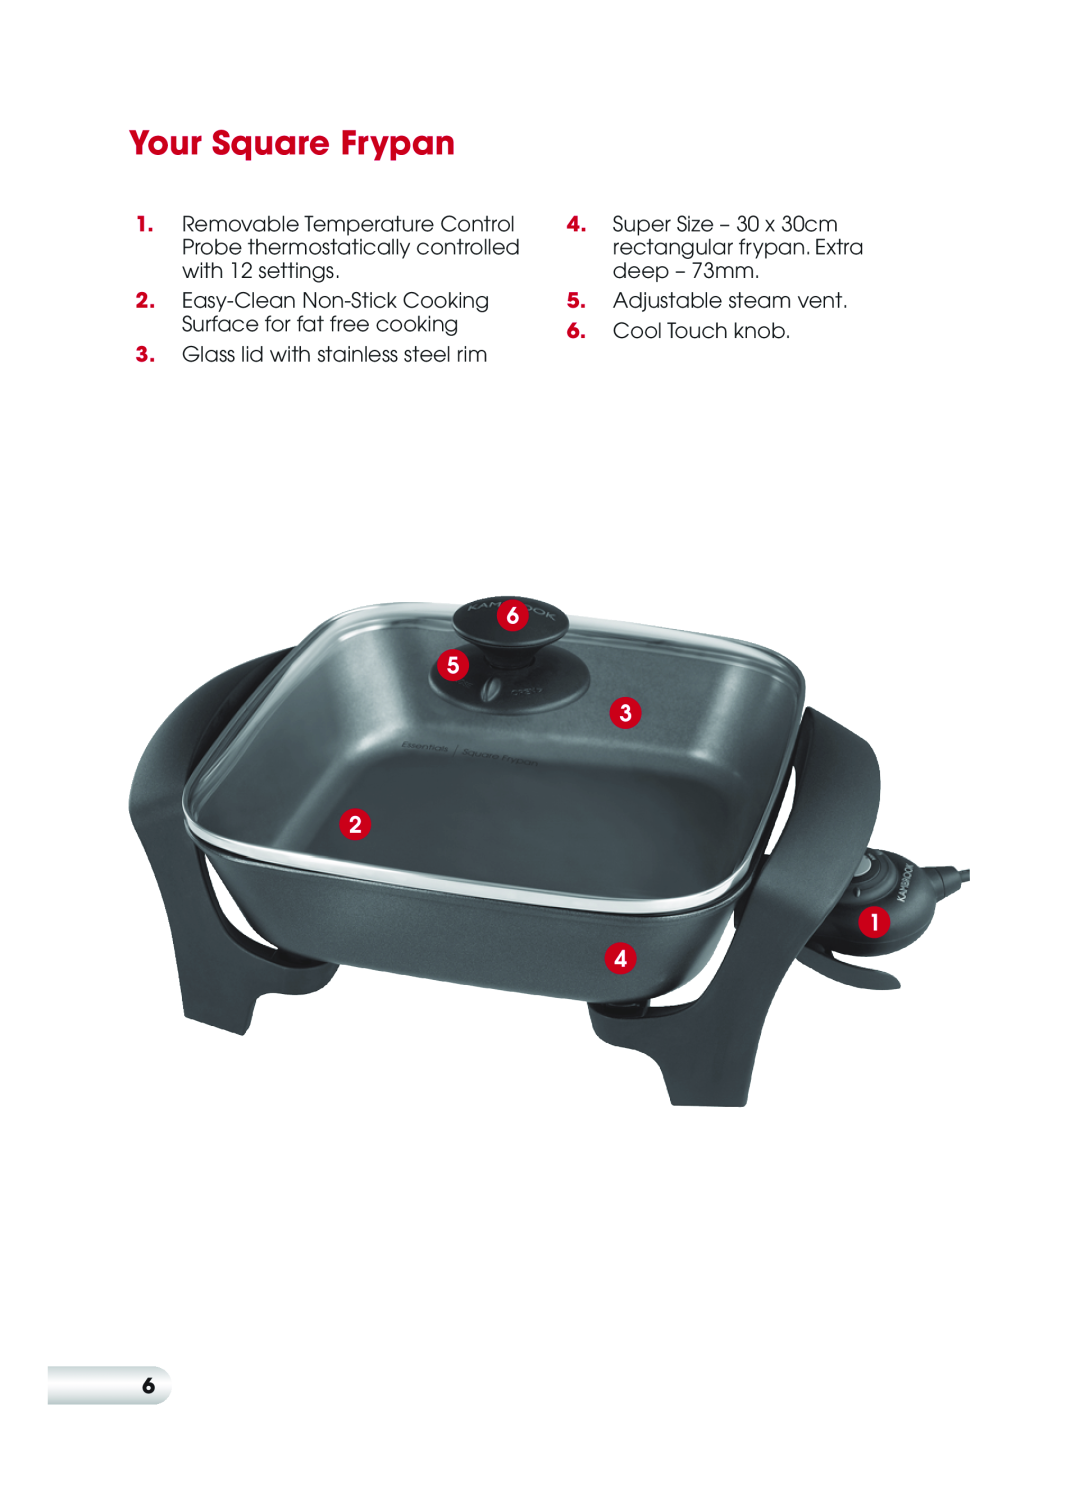 Kambrook KEF120 manual Your Square Frypan, Easy-Clean Non-Stick Cooking Surface for fat free cooking 